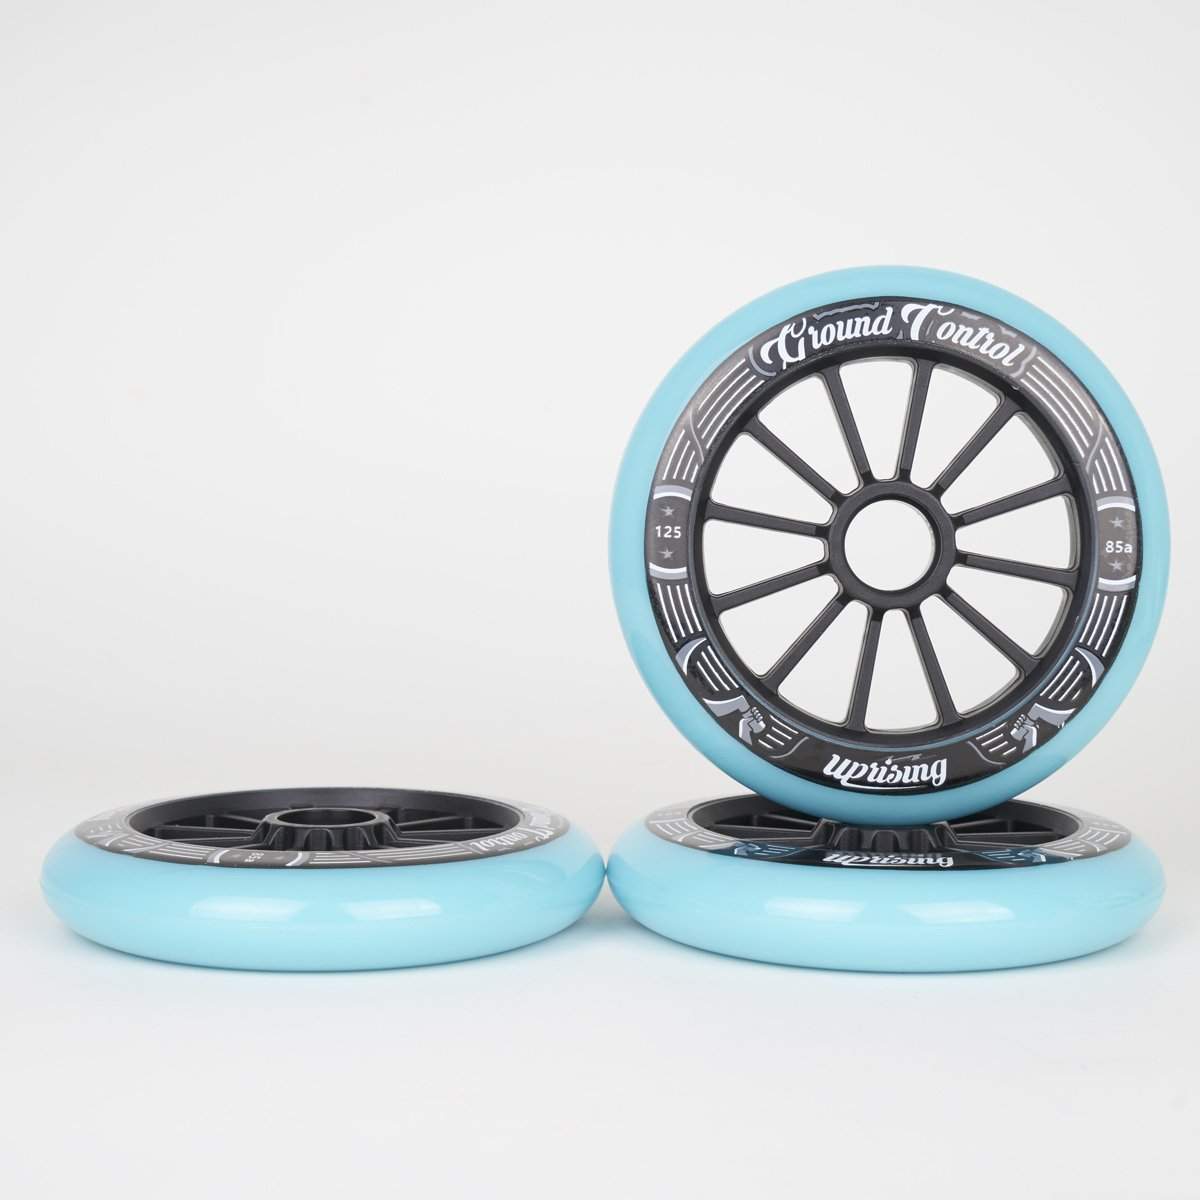 Ground Control 125mm Turquoise / Black Tri Wheels (3 Pack)